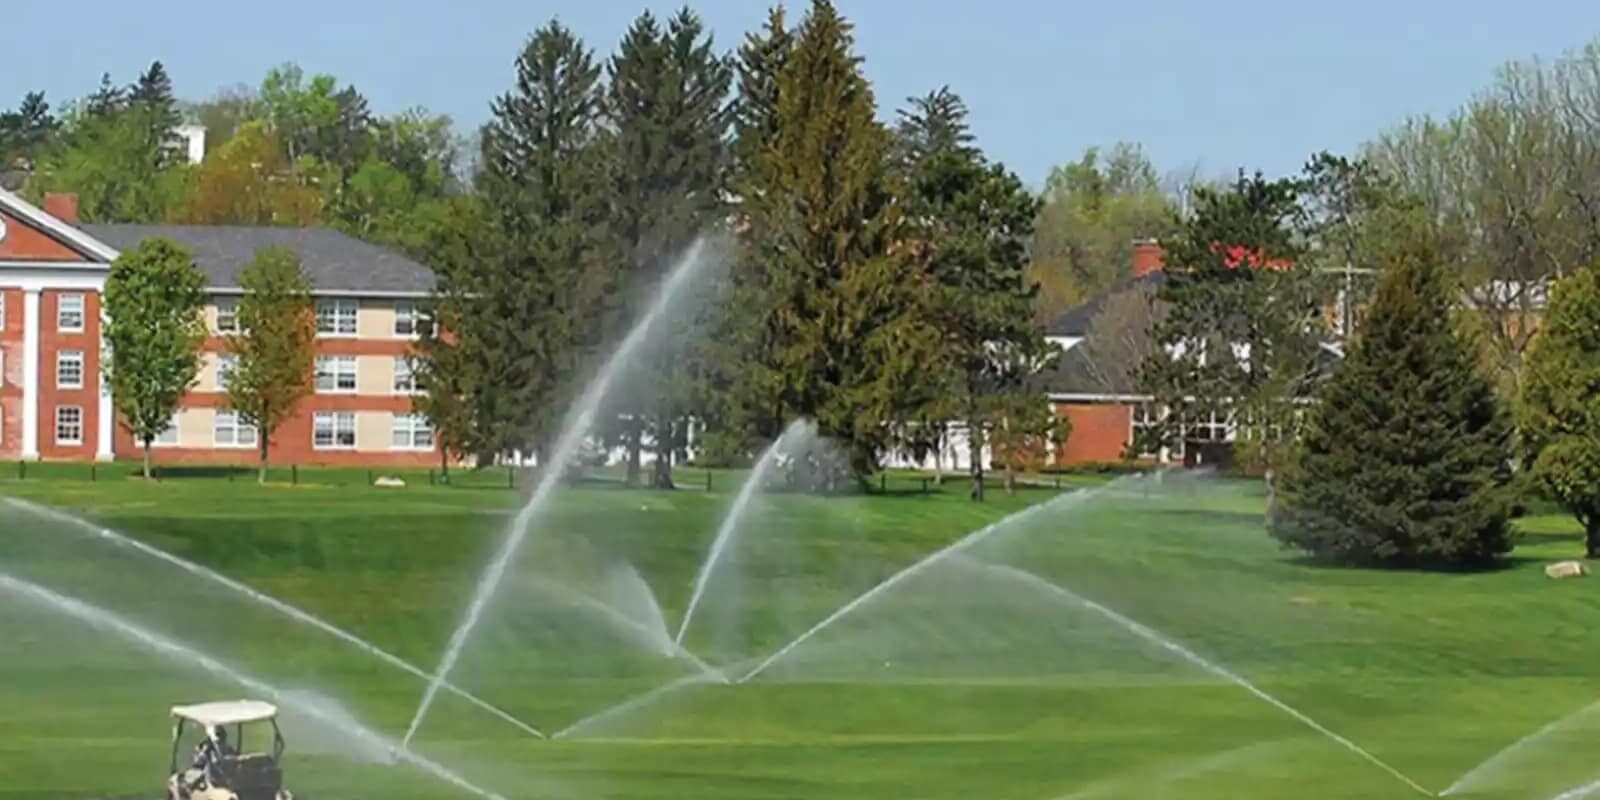 sprinklers watering a golf course lawn